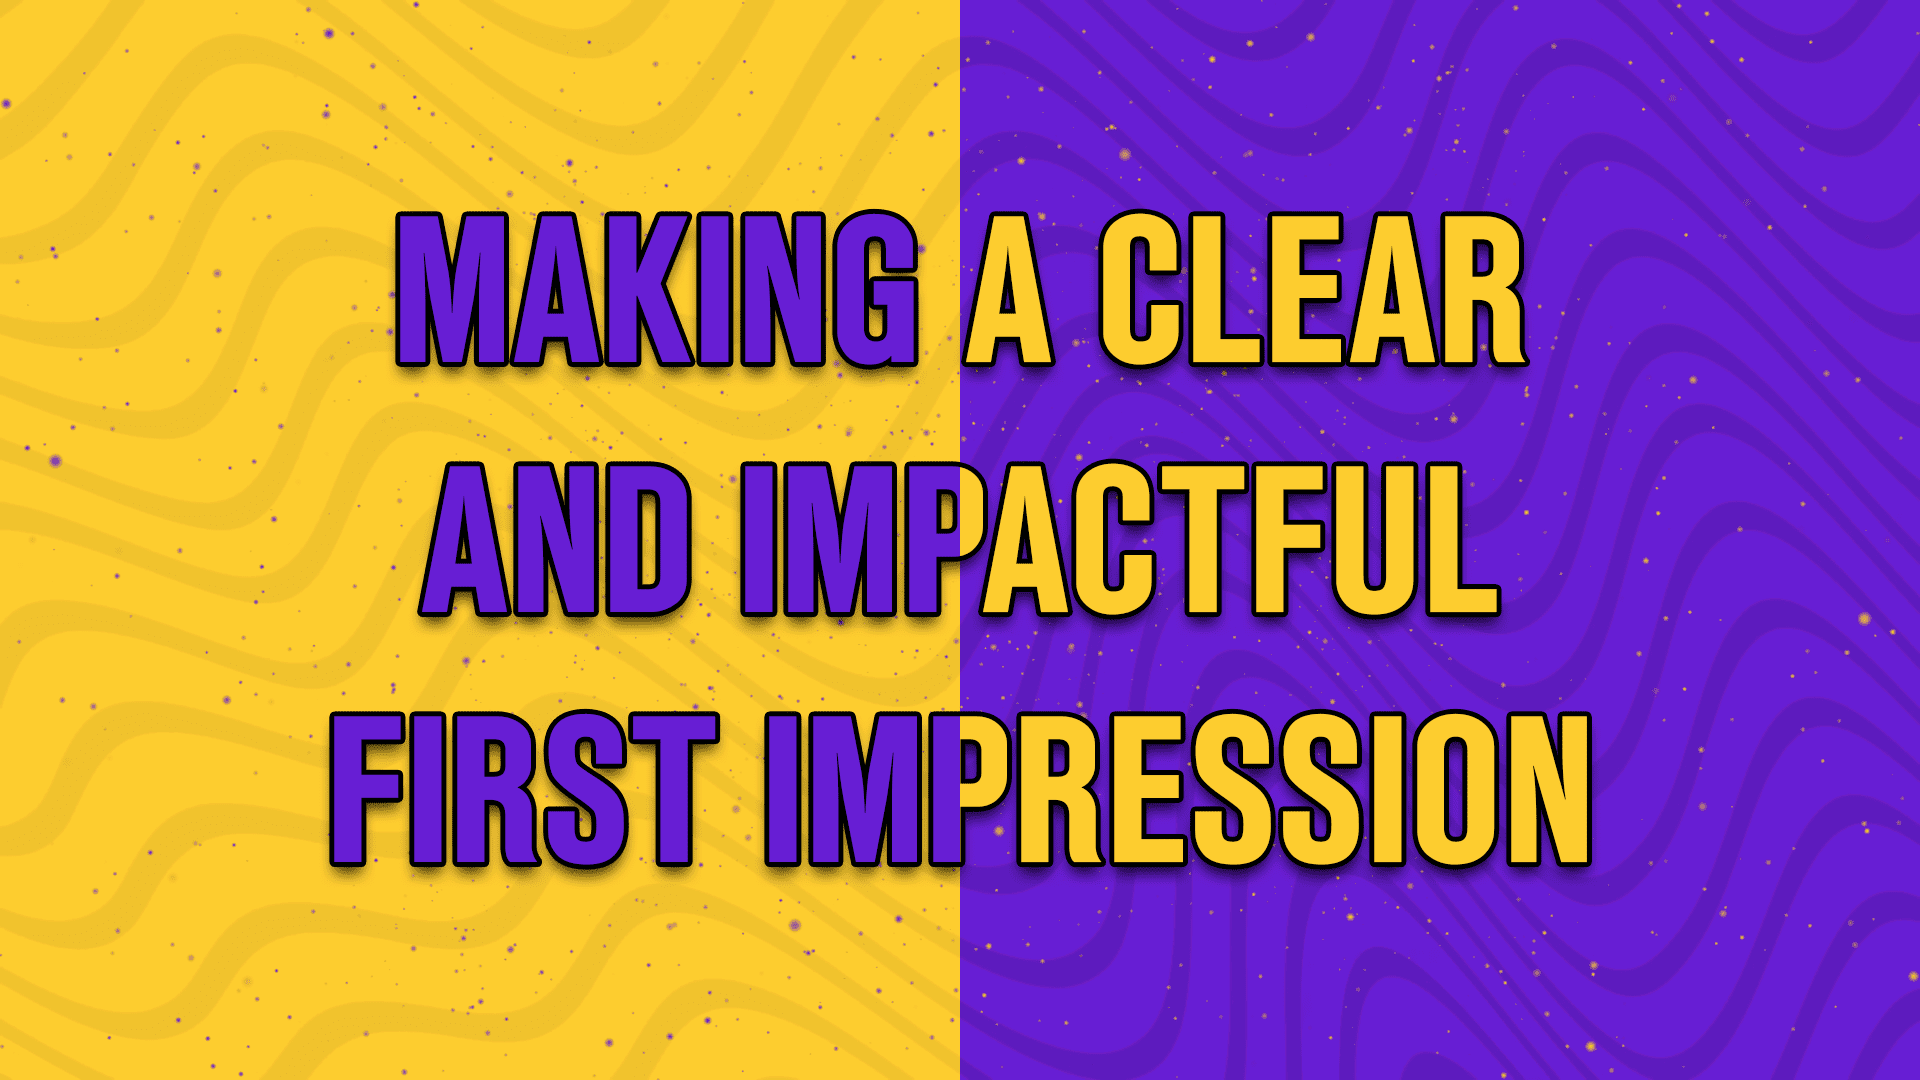 Making a clear and impactful first impression - StreamBee